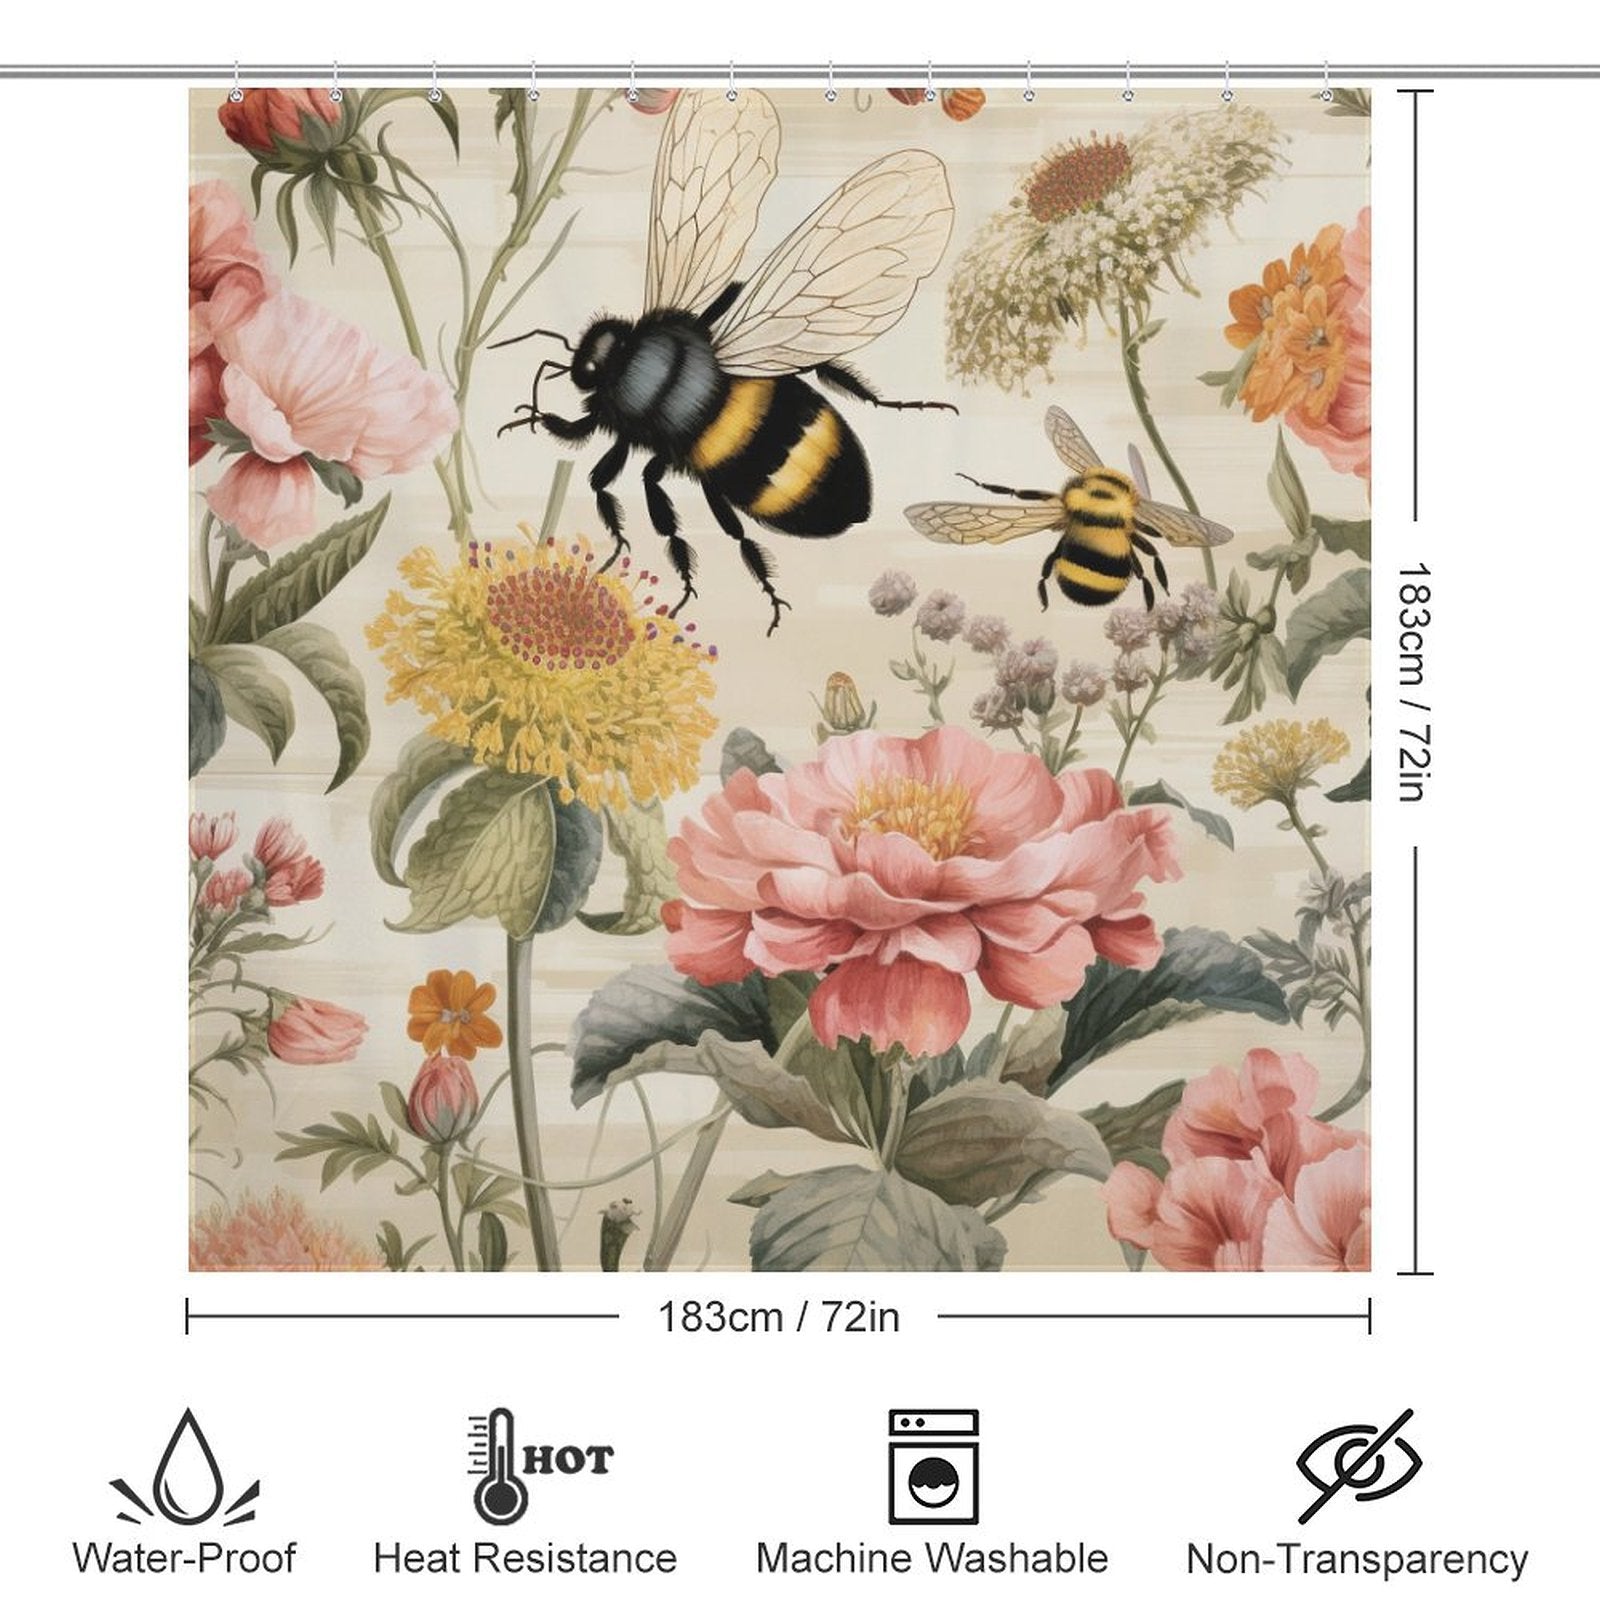 Buzzing Bumble Bee Shower Curtain